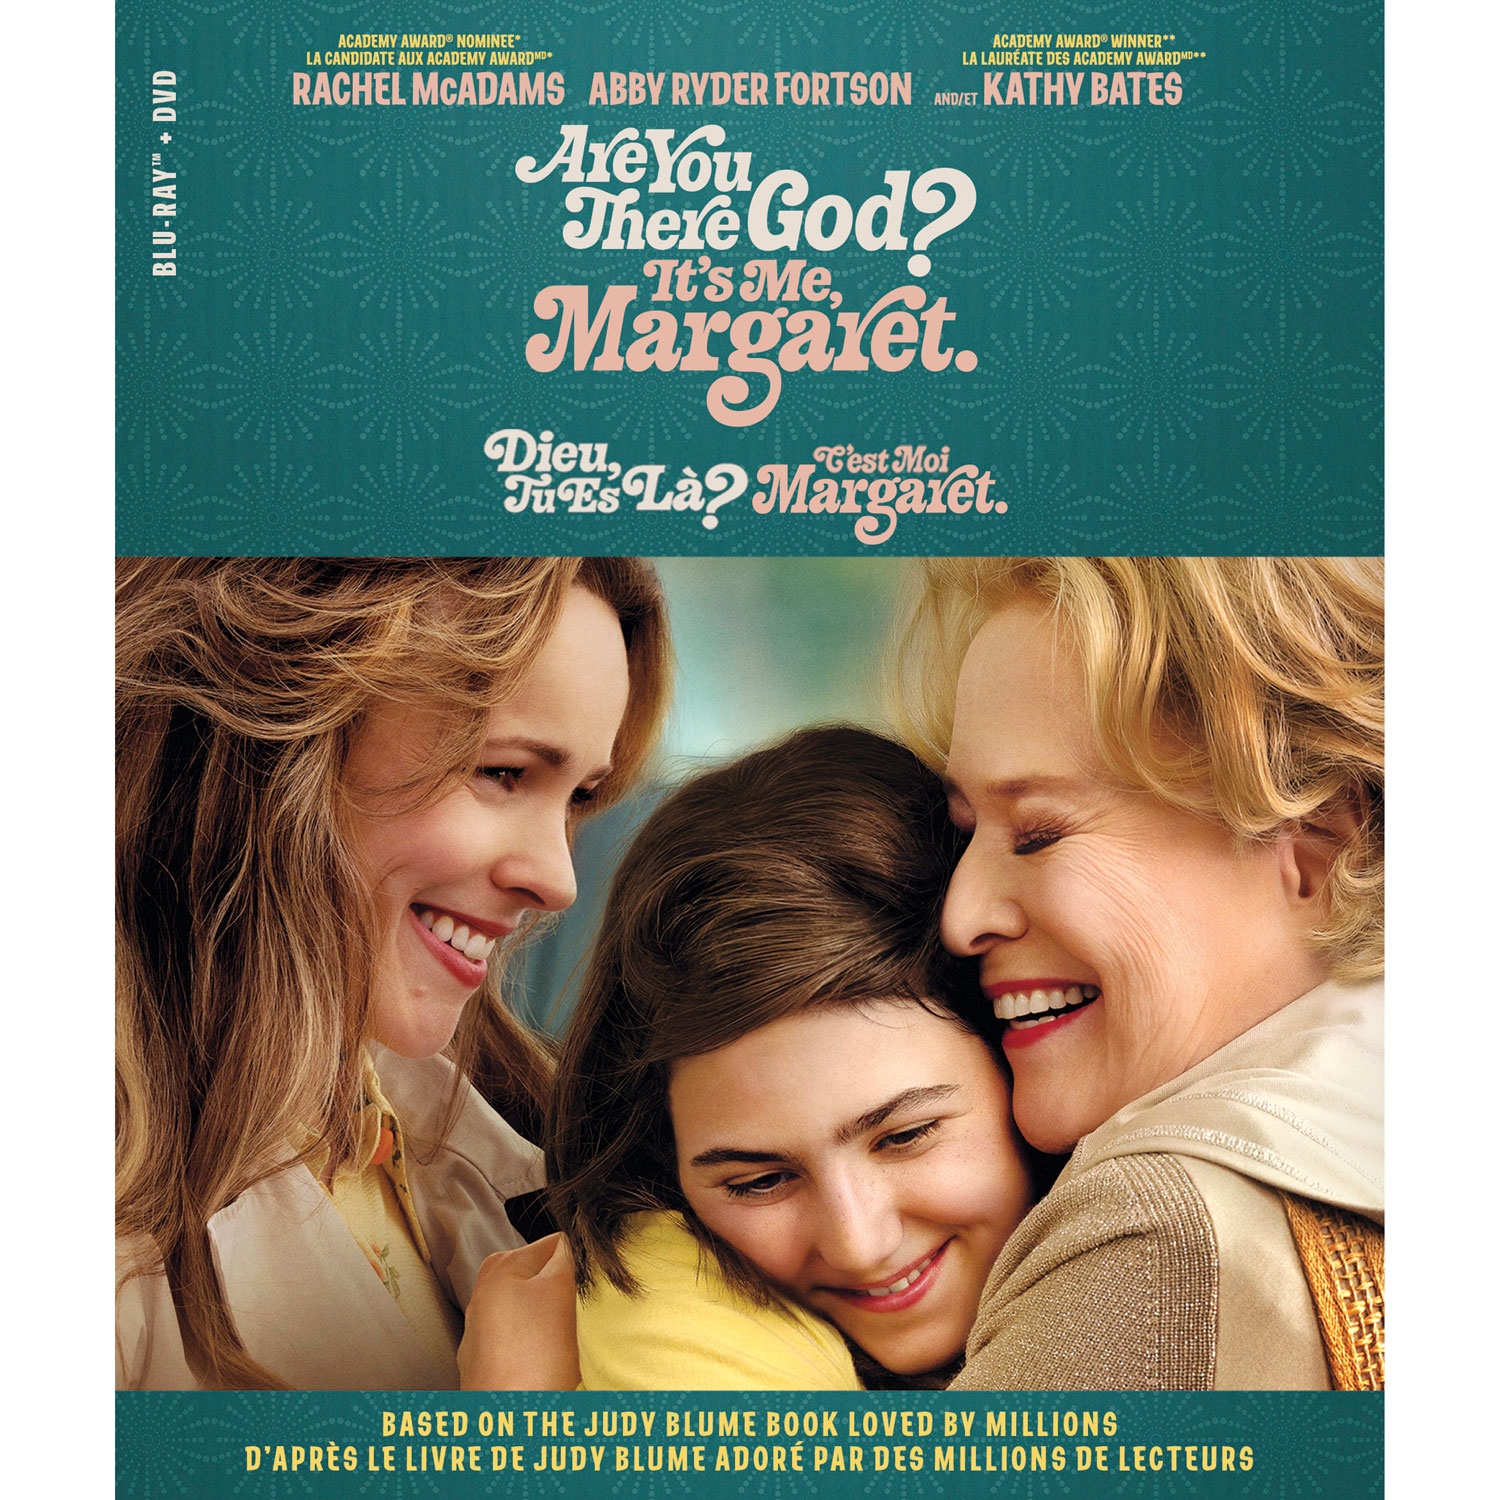 Are You There God? It's me Margaret (Blu-ray Combo)